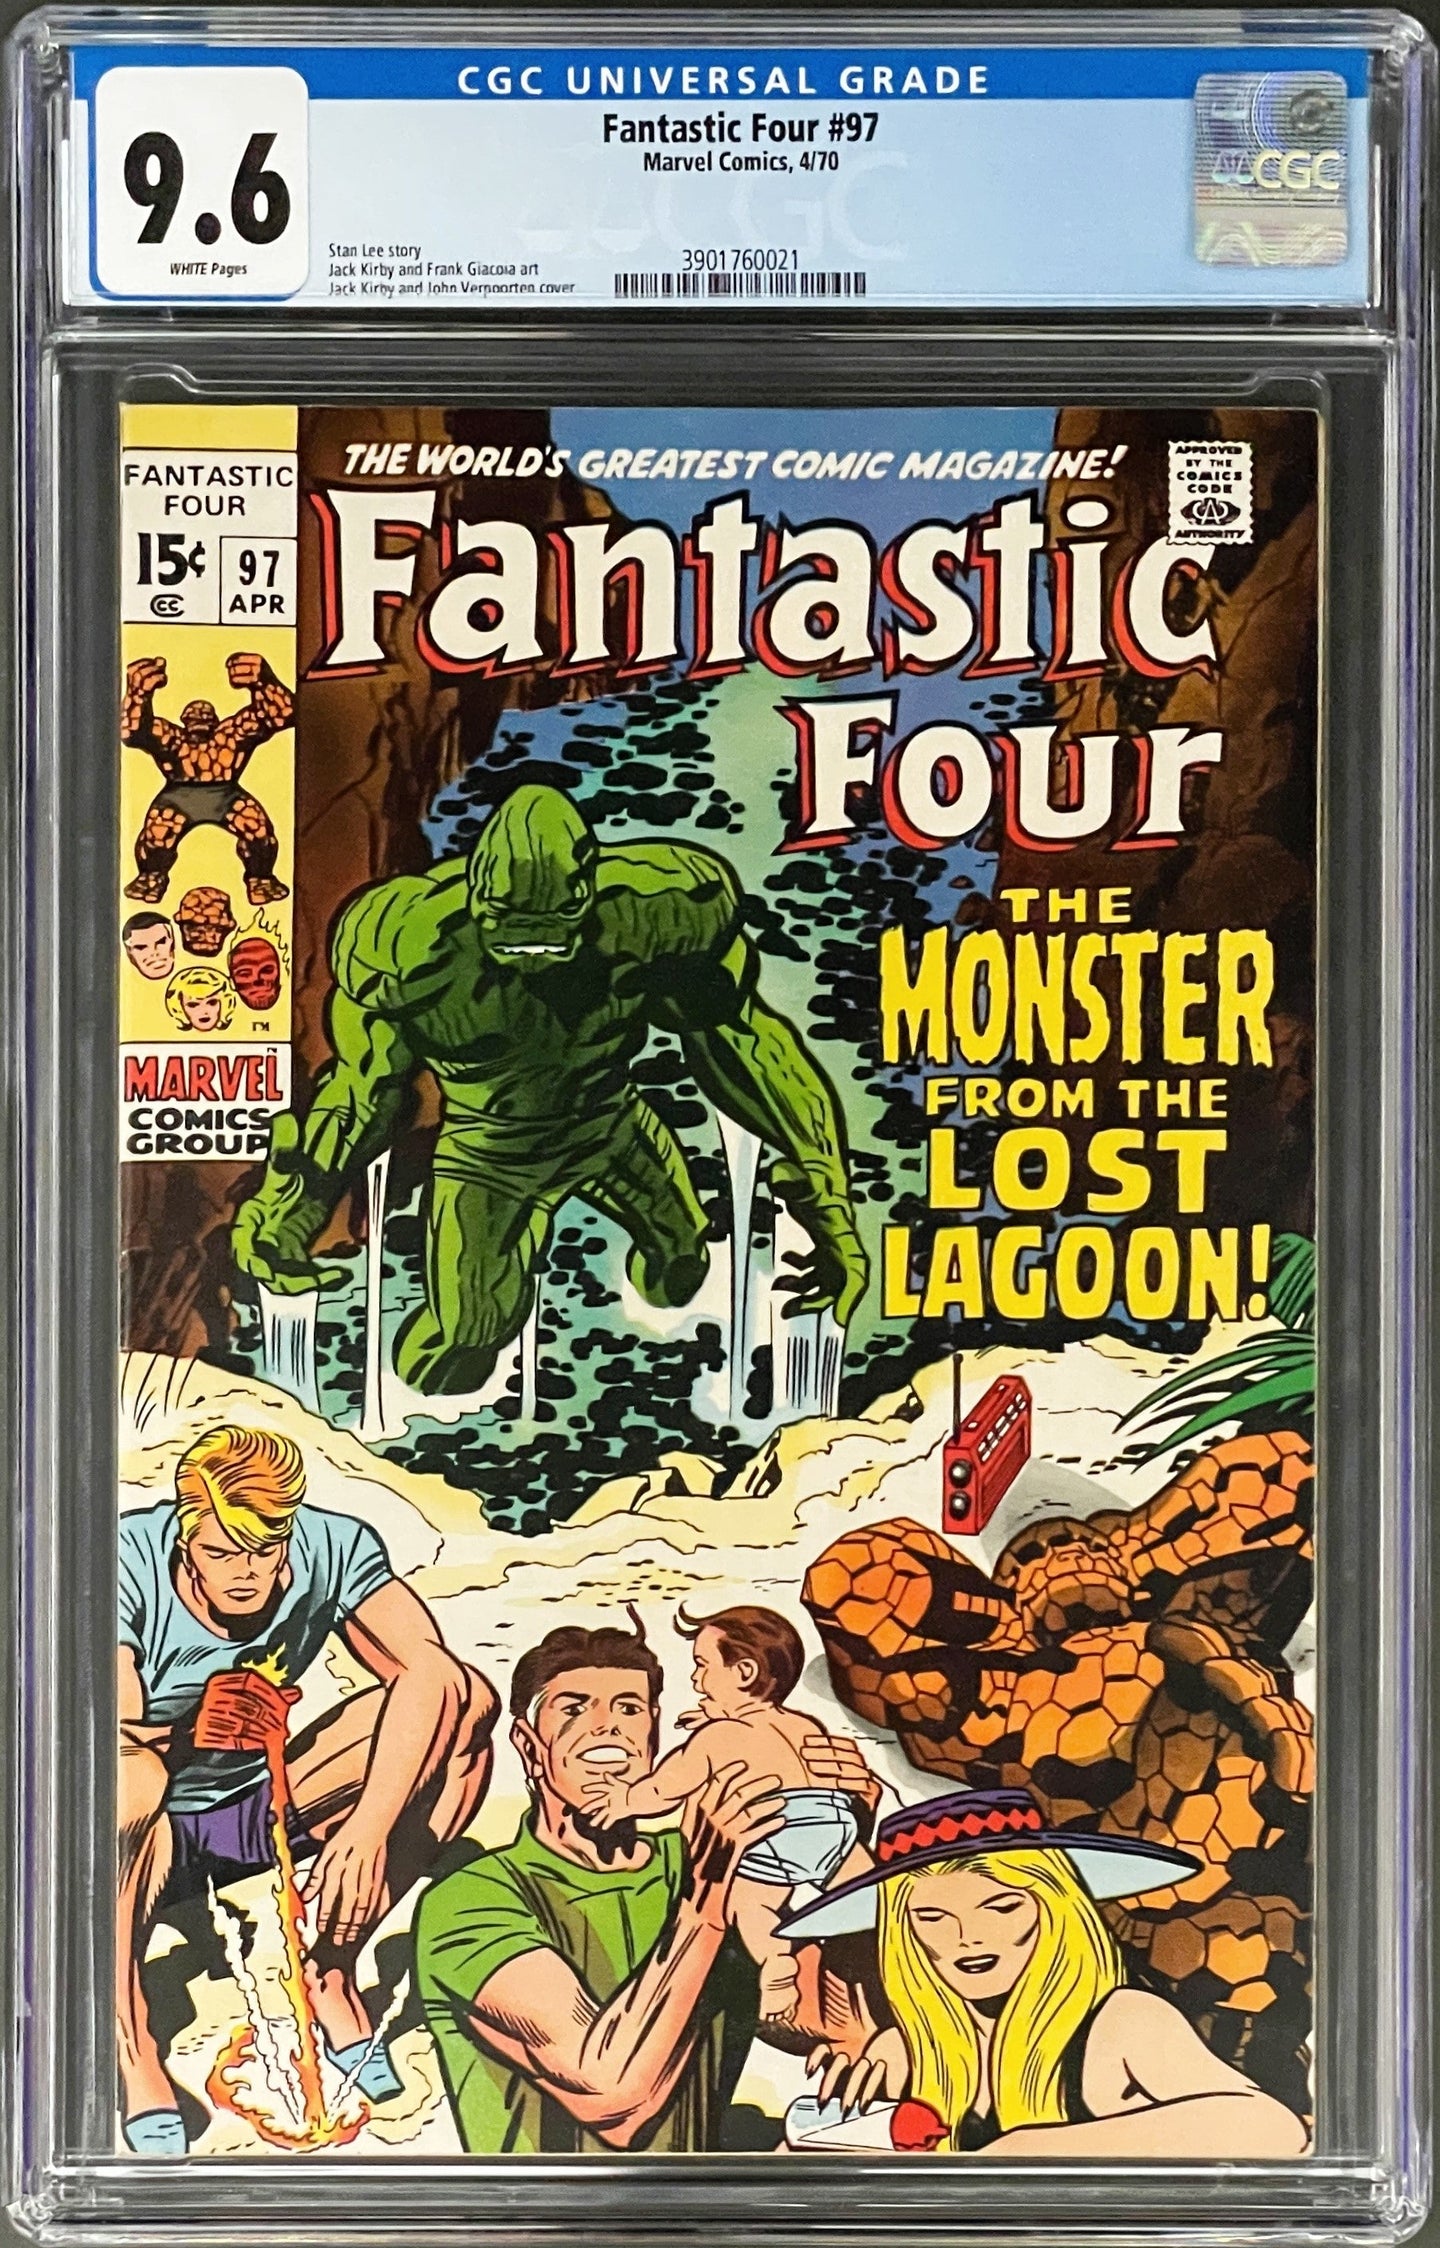 FANTASTIC FOUR #97 CGC 9.6 WHITE PAGES